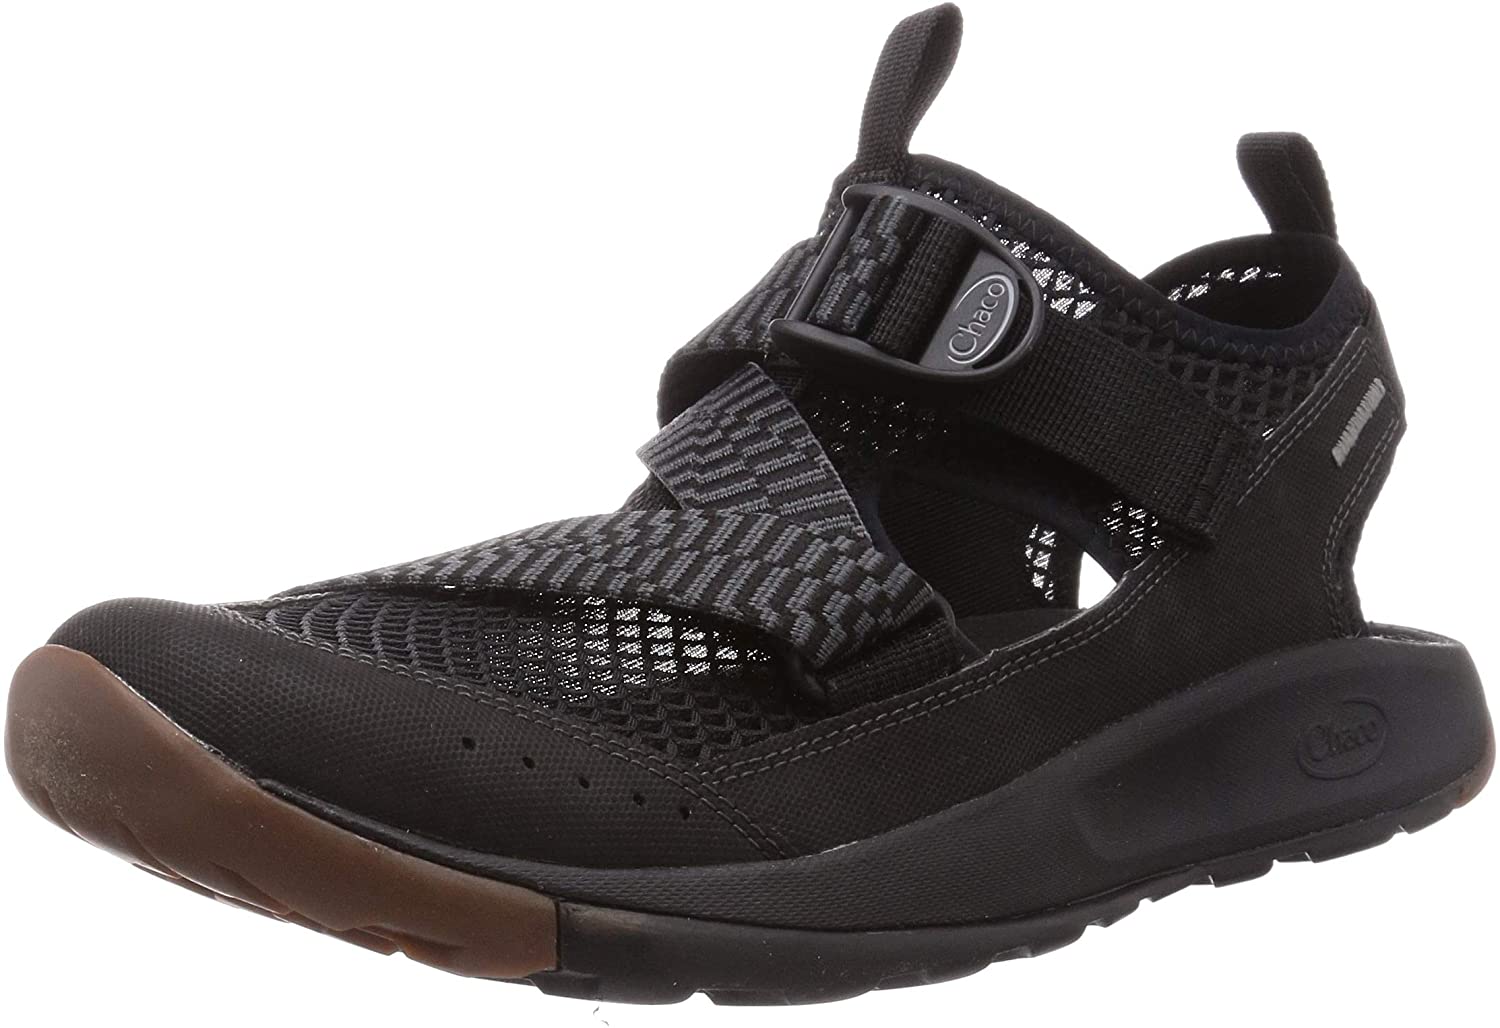 chaco men's hiking shoes